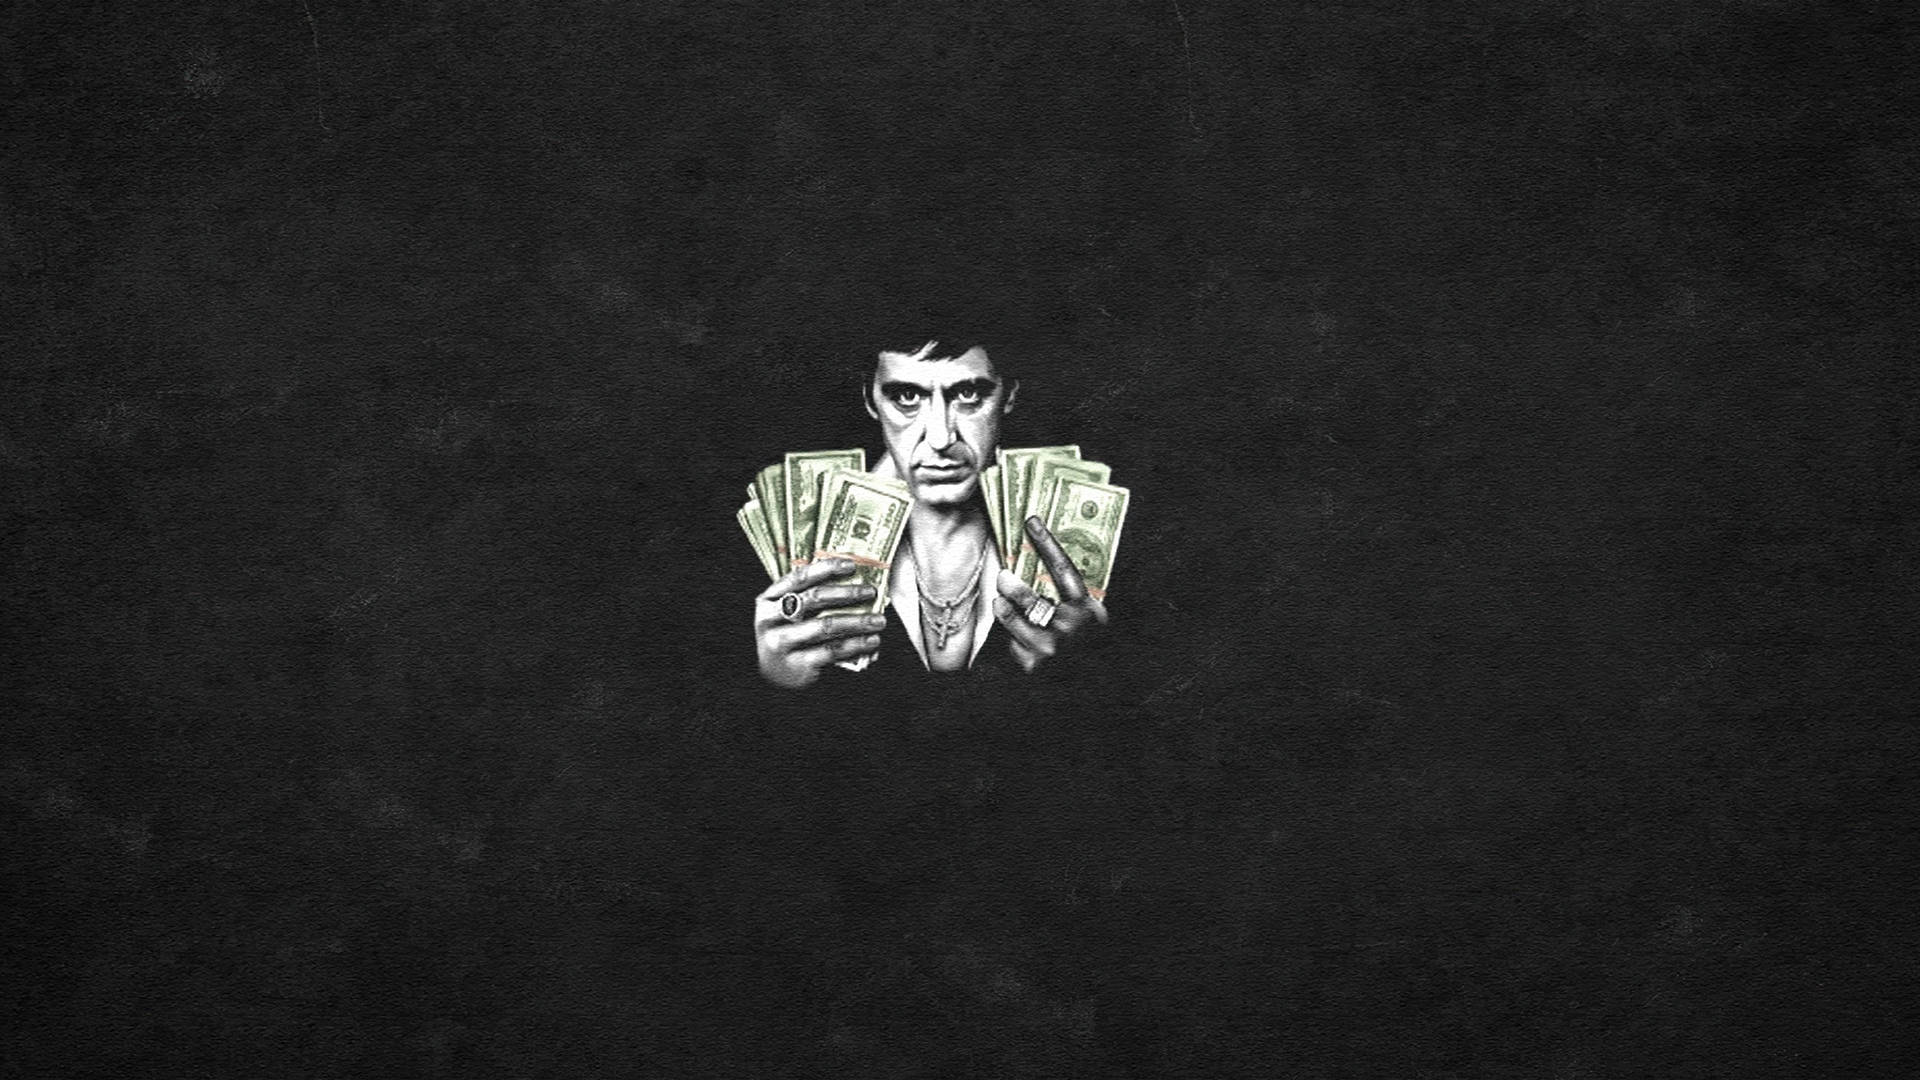 Alpacino Scarface Cash Art = Al Pacino Scarface Kontanter Konst (for A Computer Or Mobile Wallpaper Featuring Money And A Portrait Of Al Pacino As His Character In The Movie Scarface) Wallpaper